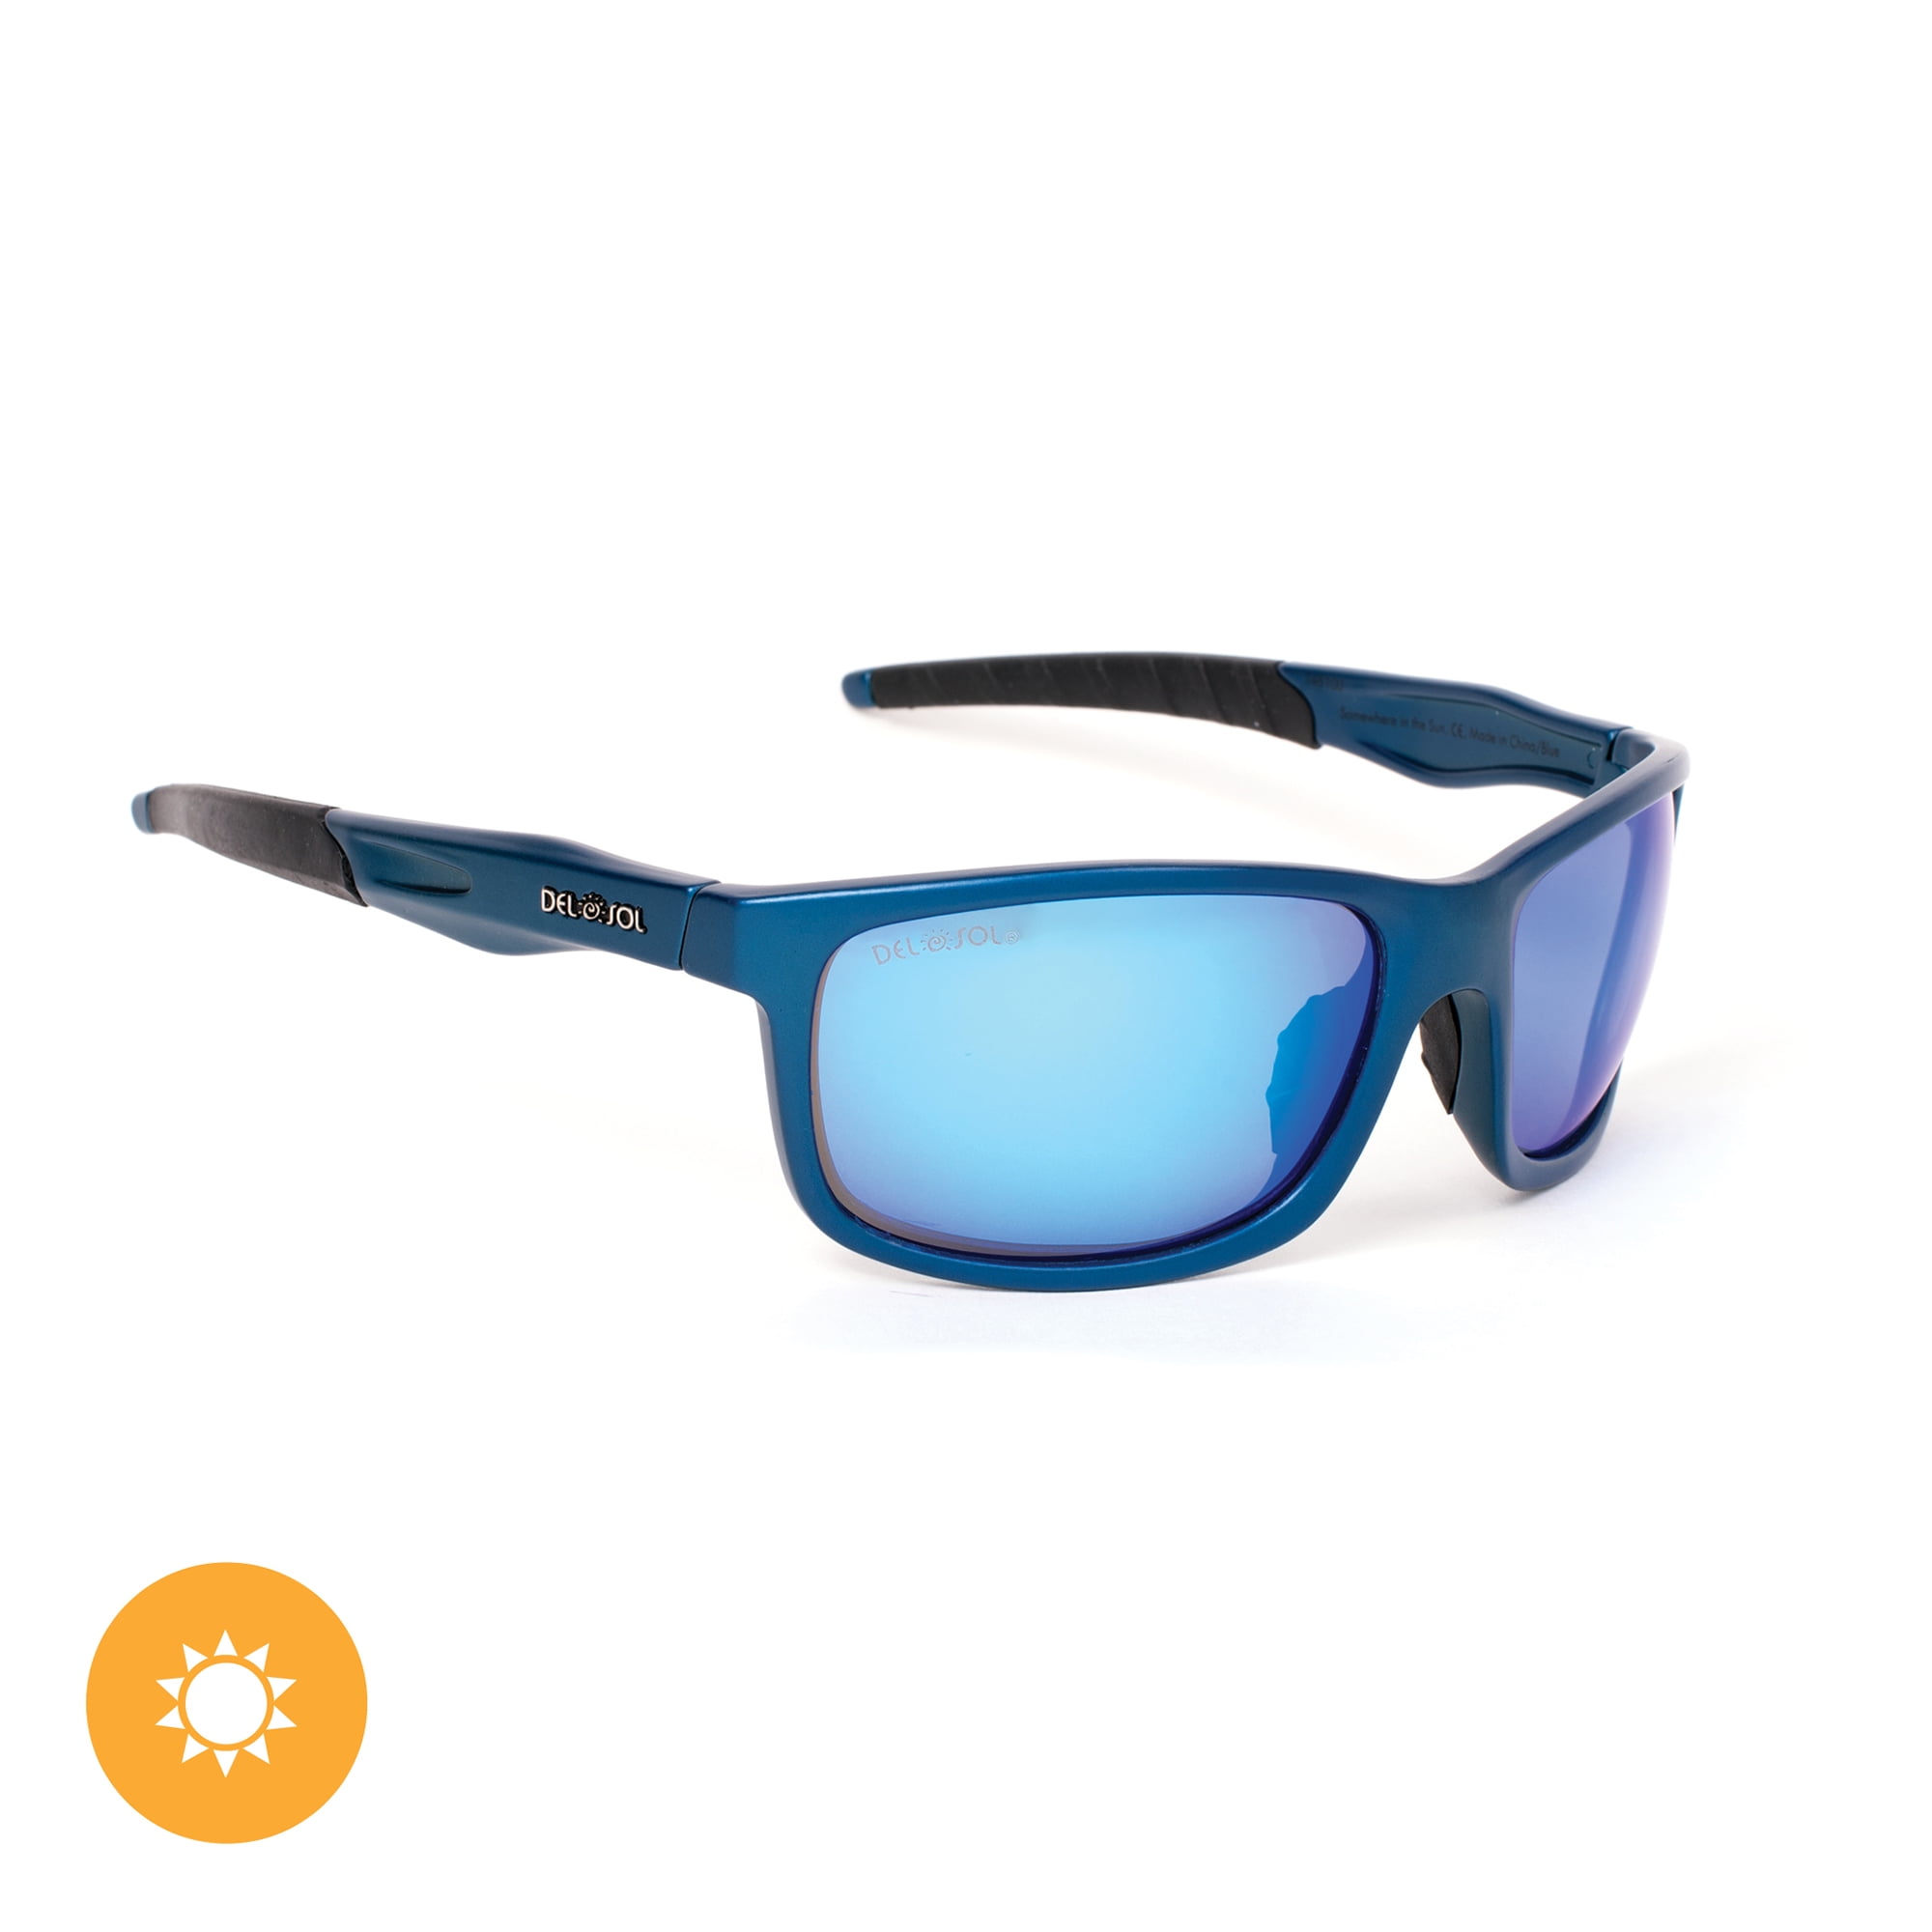 Sunglasses for Boys 100% Uva & Uvb Protection DelSol Sunglasses Frosted Clear to Blue Kids Solize Boys of Summer Changes Color from Silver to Blue in the Sun 1 Pc Polarized Pro Lens 